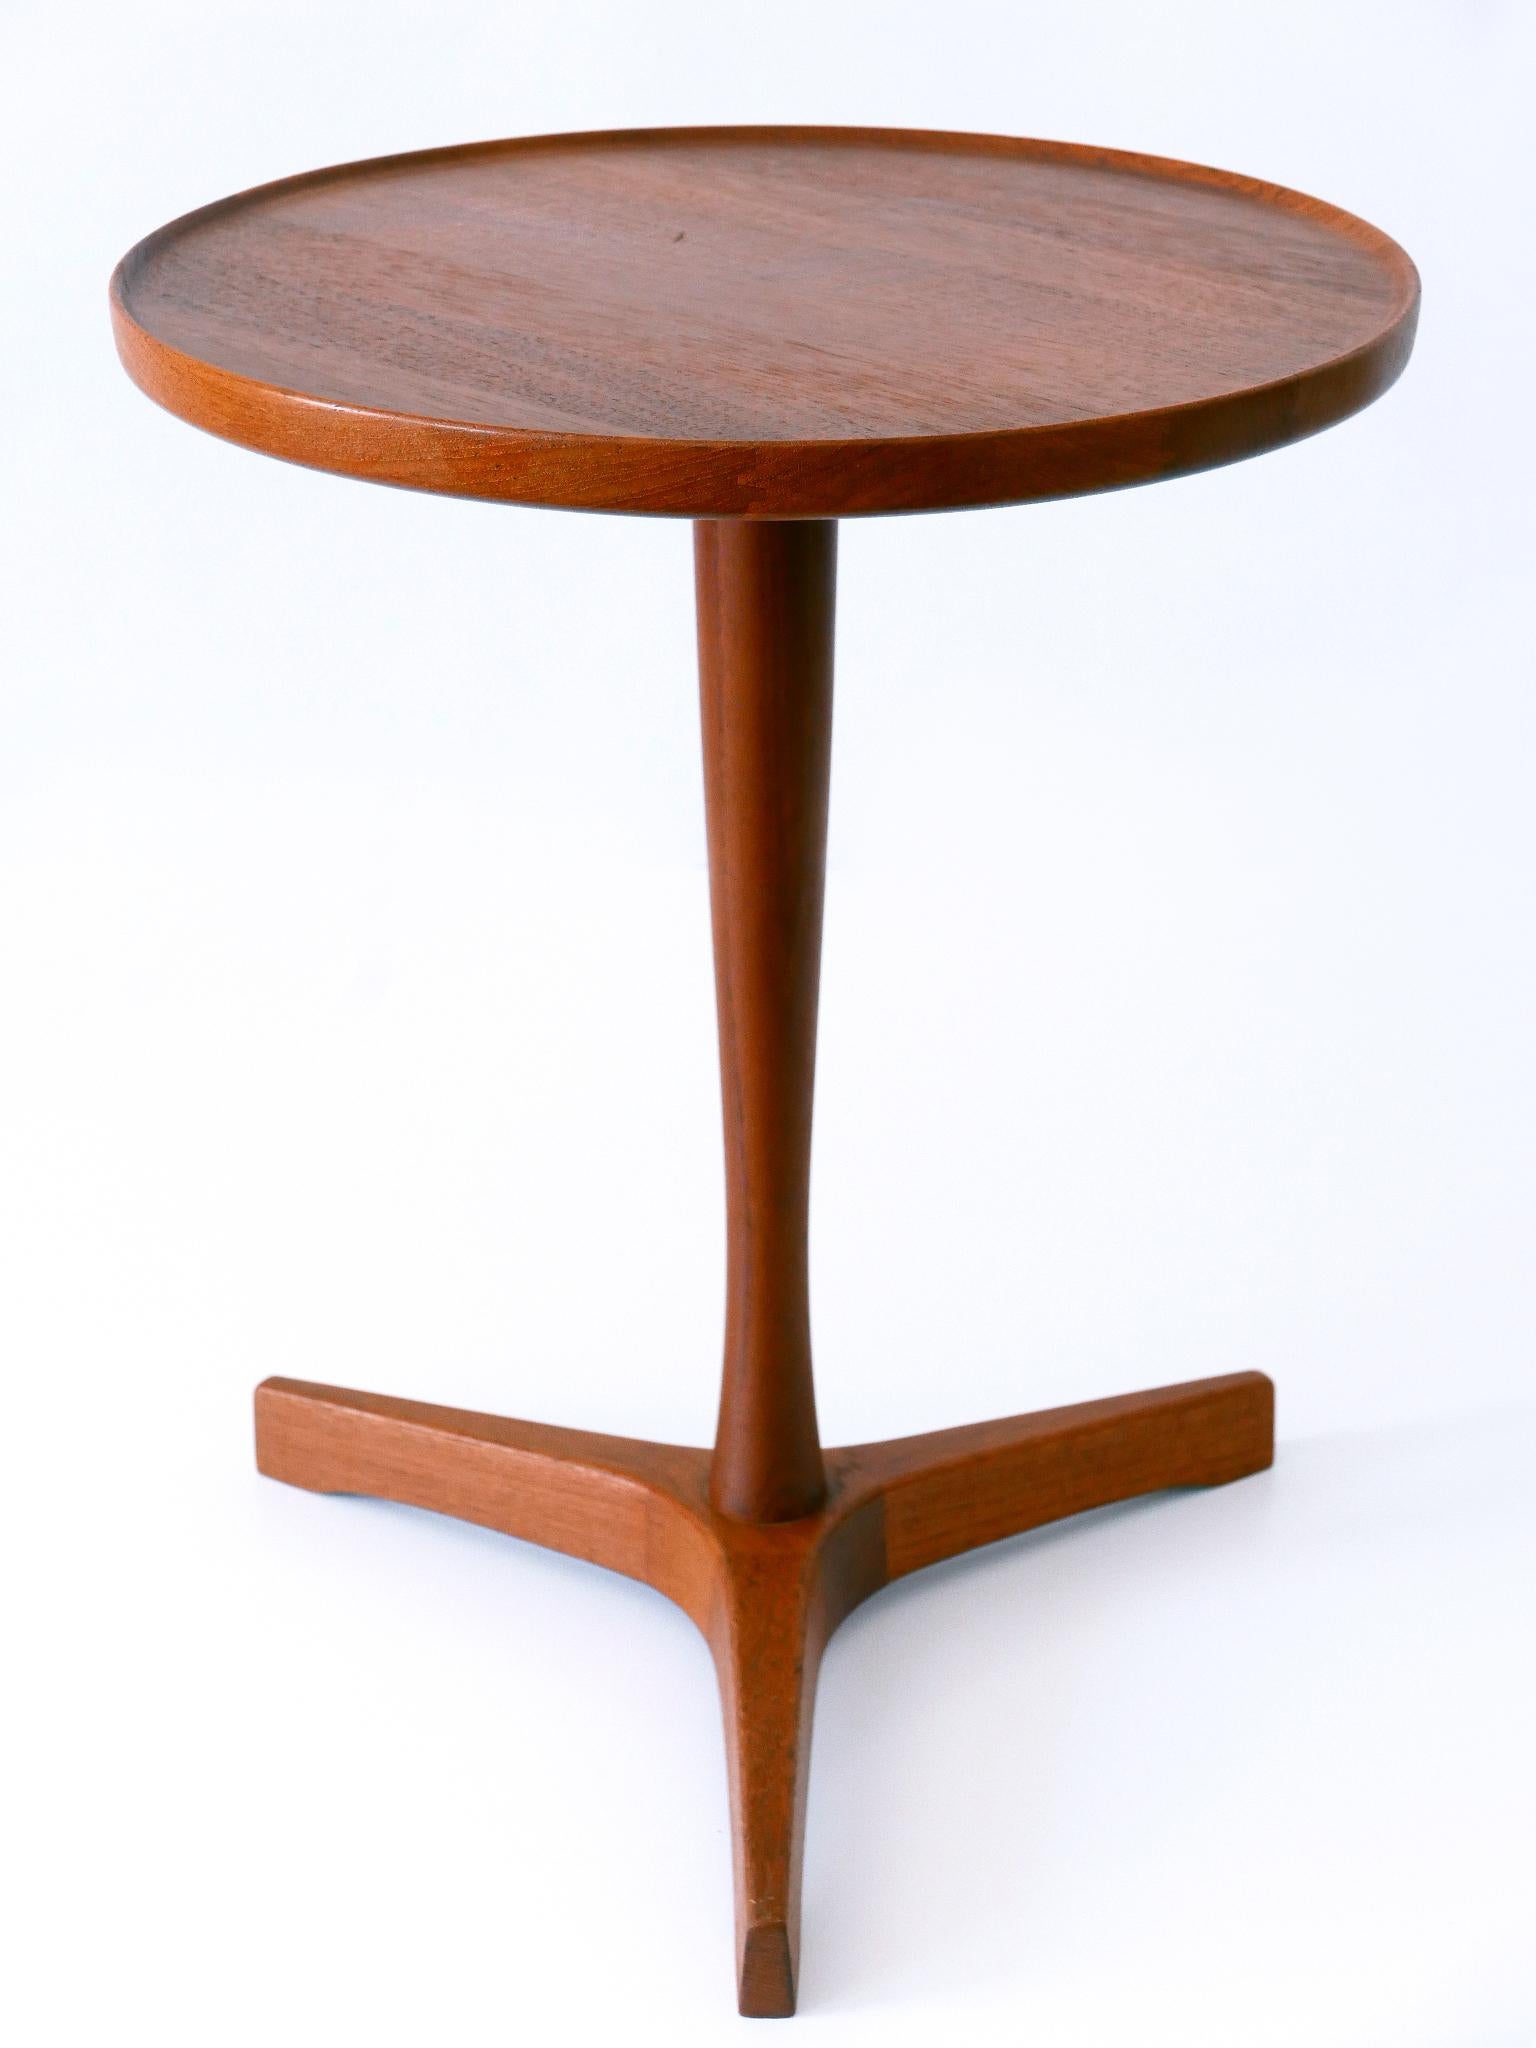 Rare and elegant Mid-Century Modern occasional side table. 
Designed by Hans C. Andersen and manufactured by Artek, Denmark, 1960s.
Marked beneath the plate: Made in Denmark by Artek.

Executed in teak wood.

Dimensions: 
H 17.72 in (45 cm)
Dm 14.18